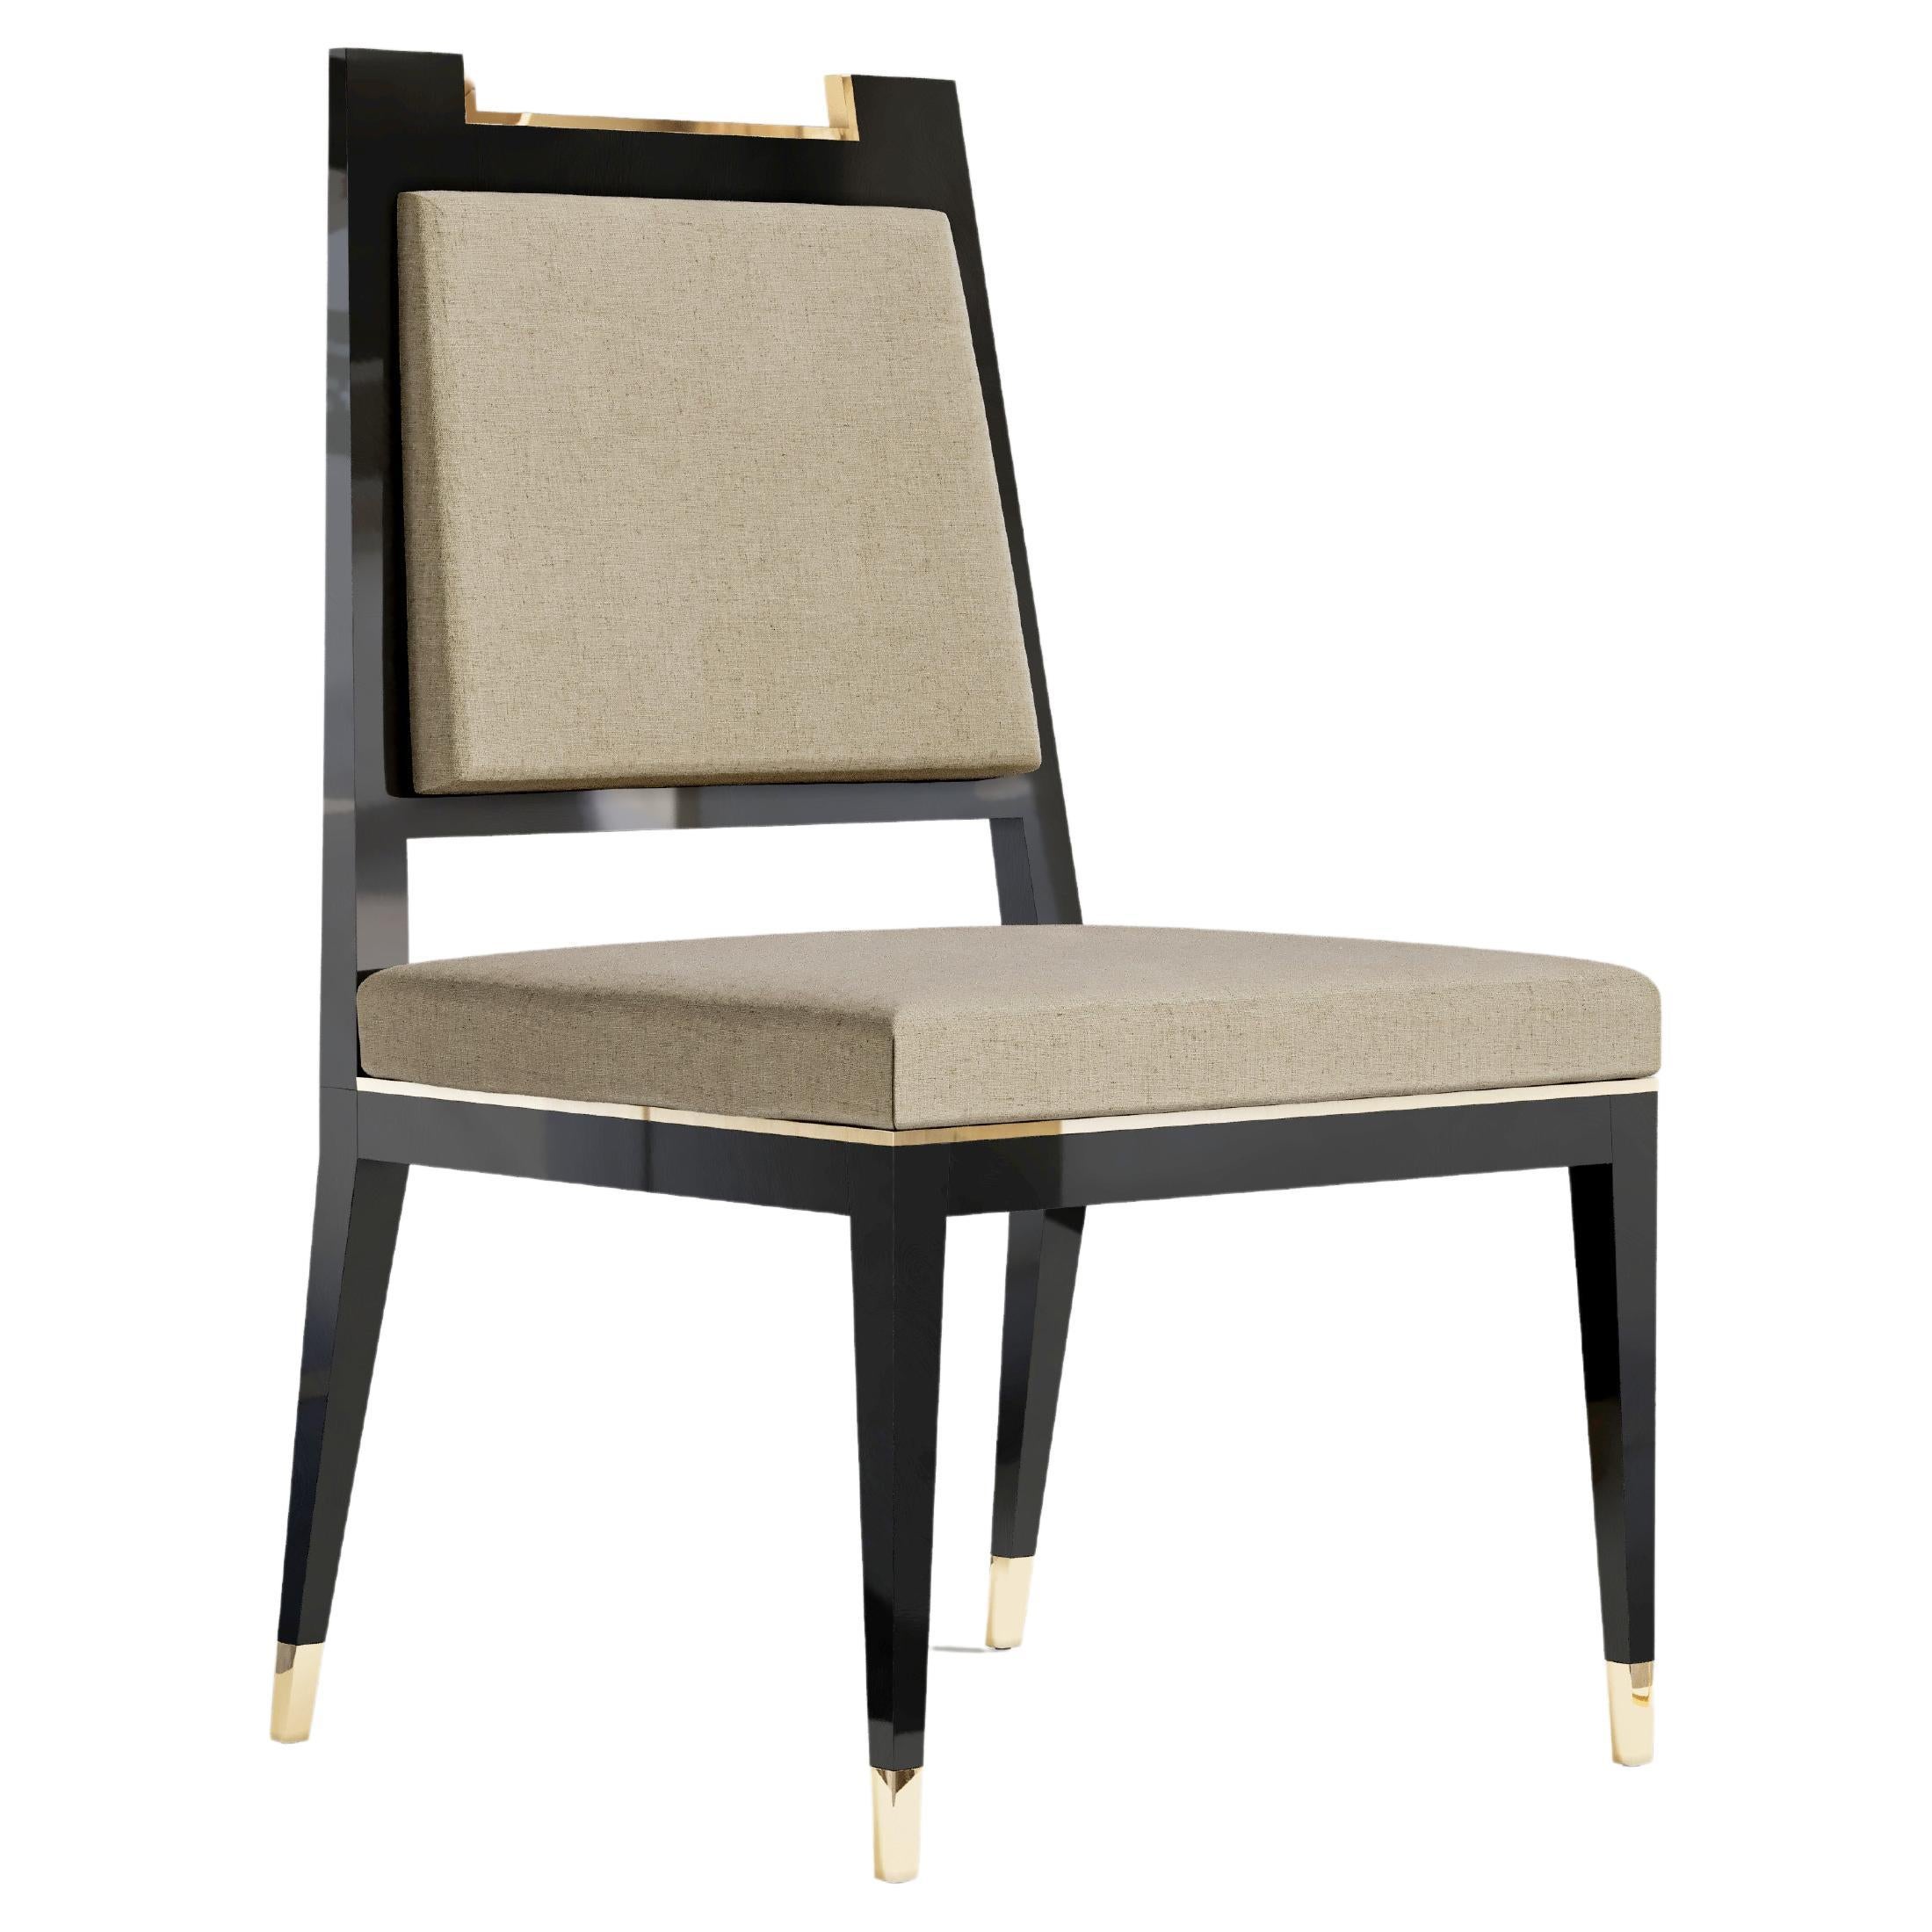 Palena Dining Chair in Black Lacquer and Polished Bronze by Palena Furniture